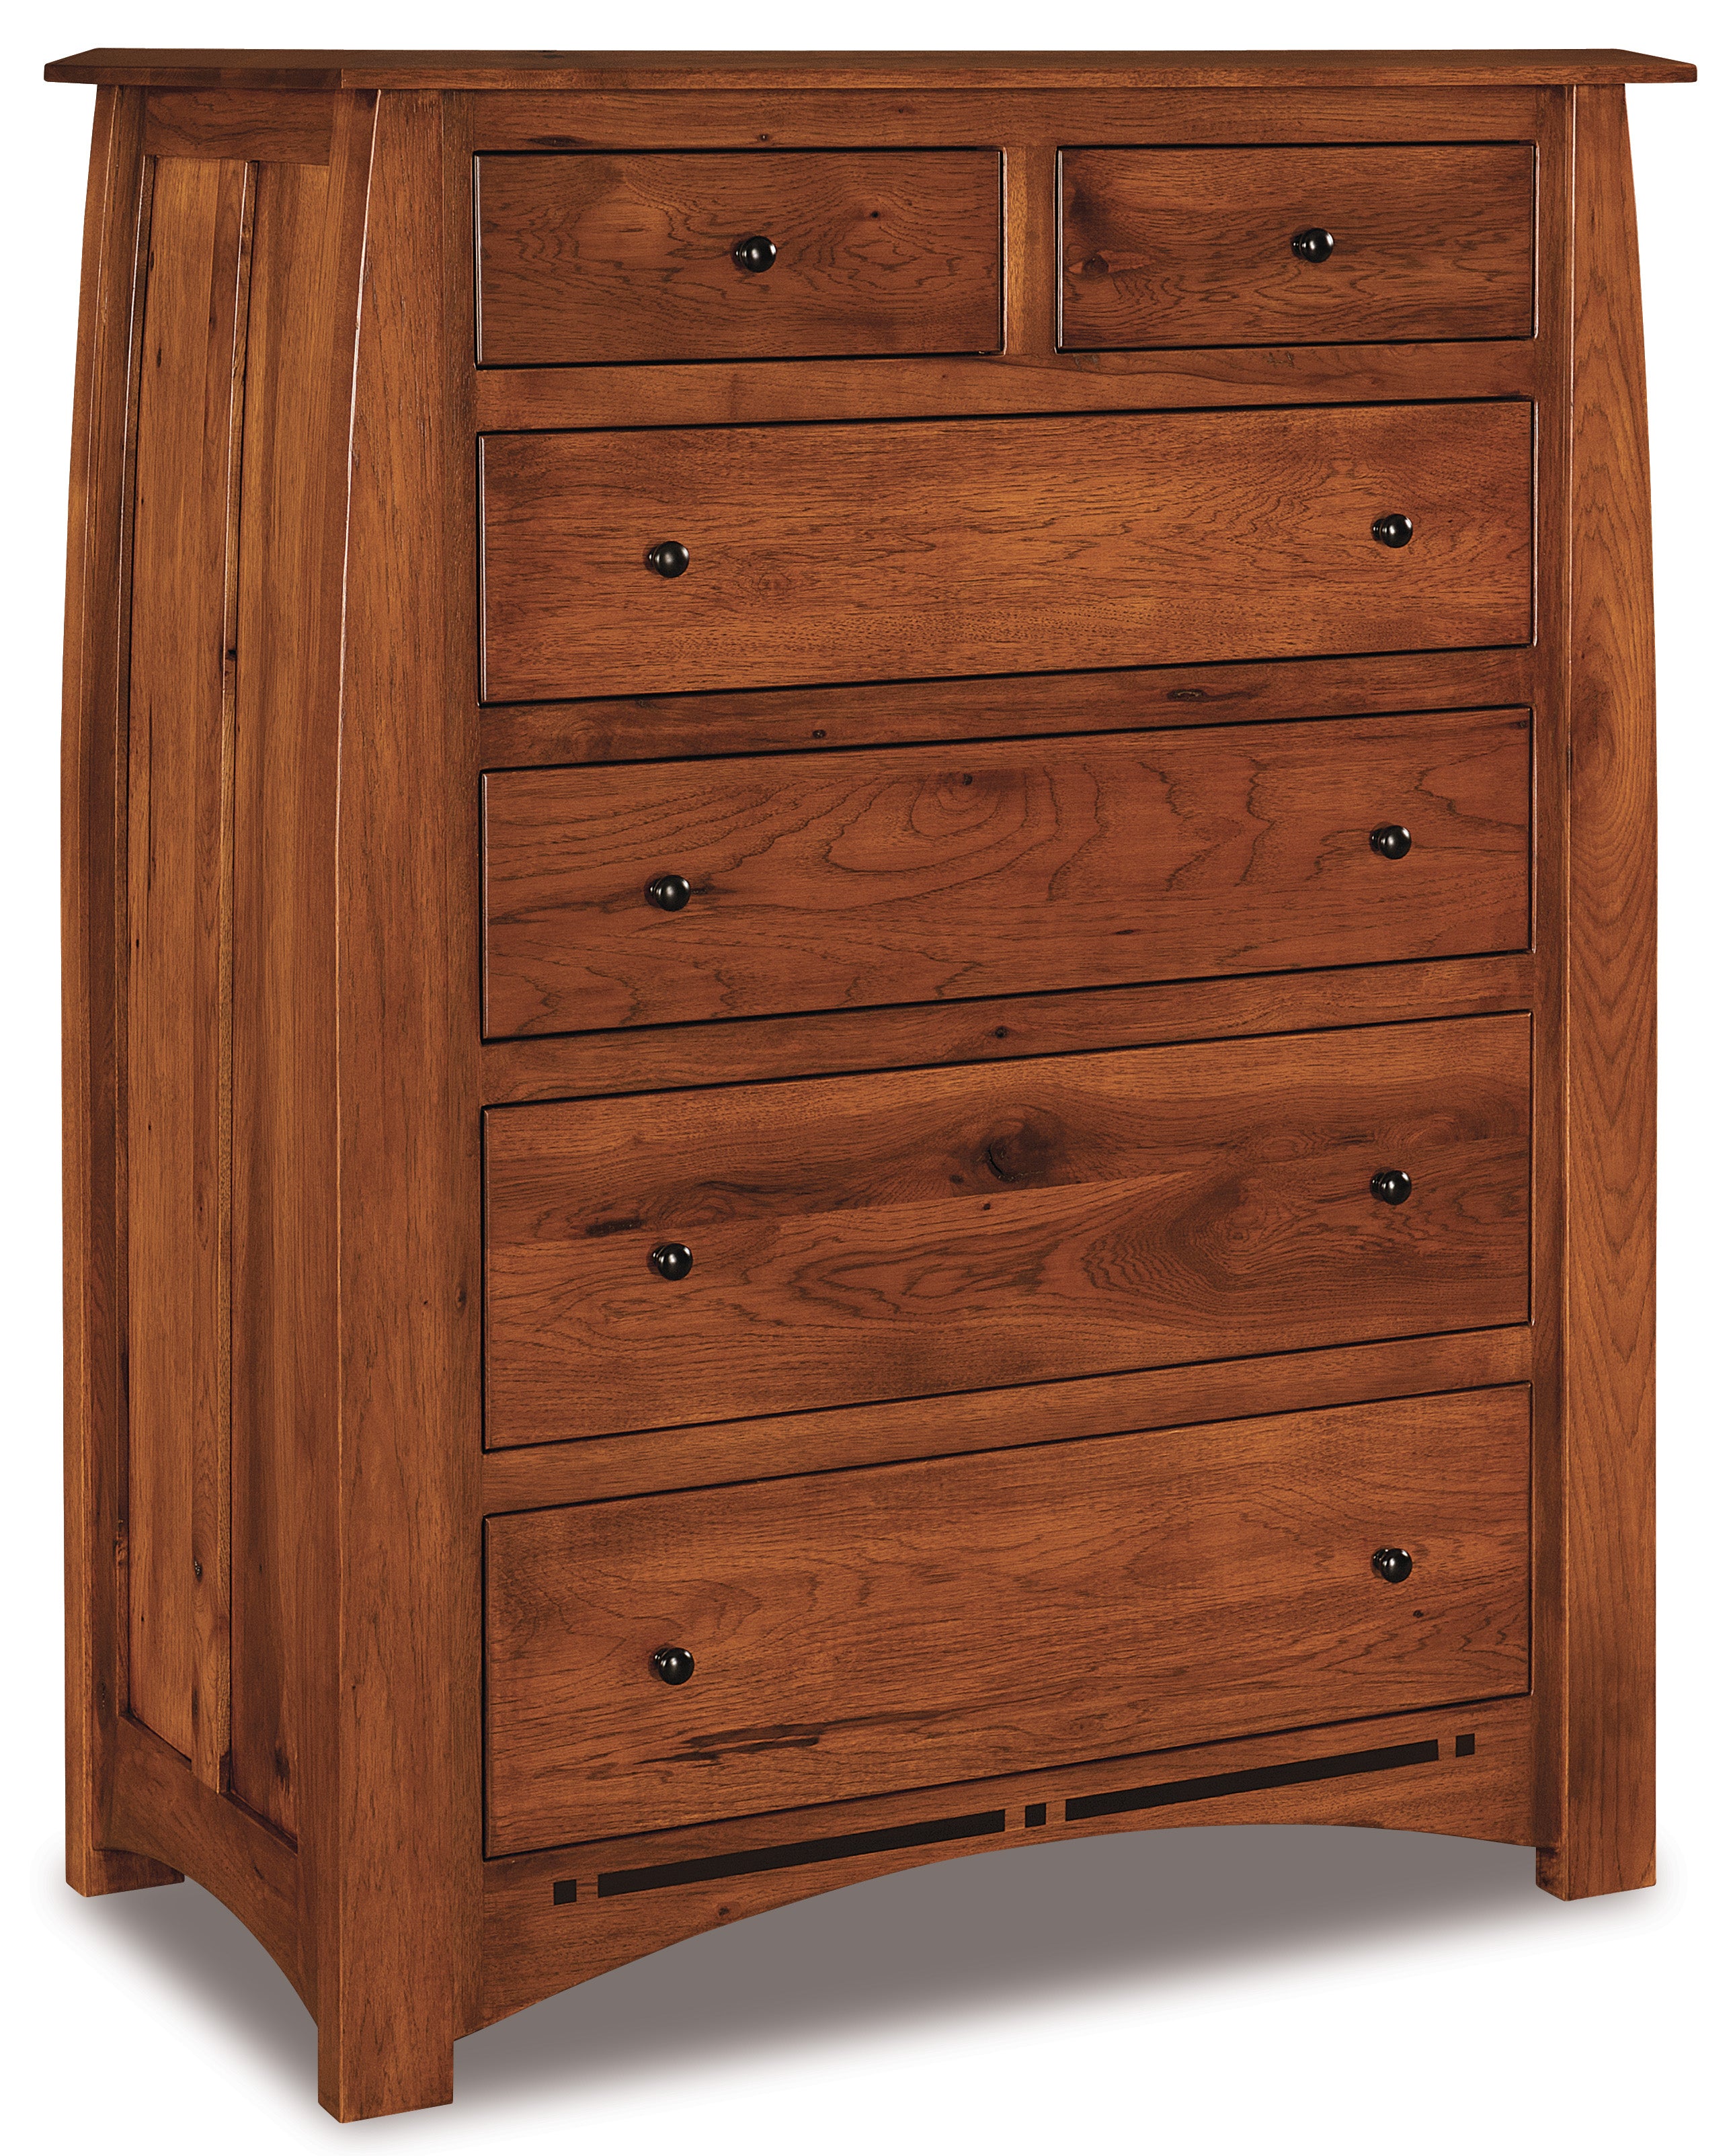 Amish Boulder Creek Chest of Drawers - Quick Ship